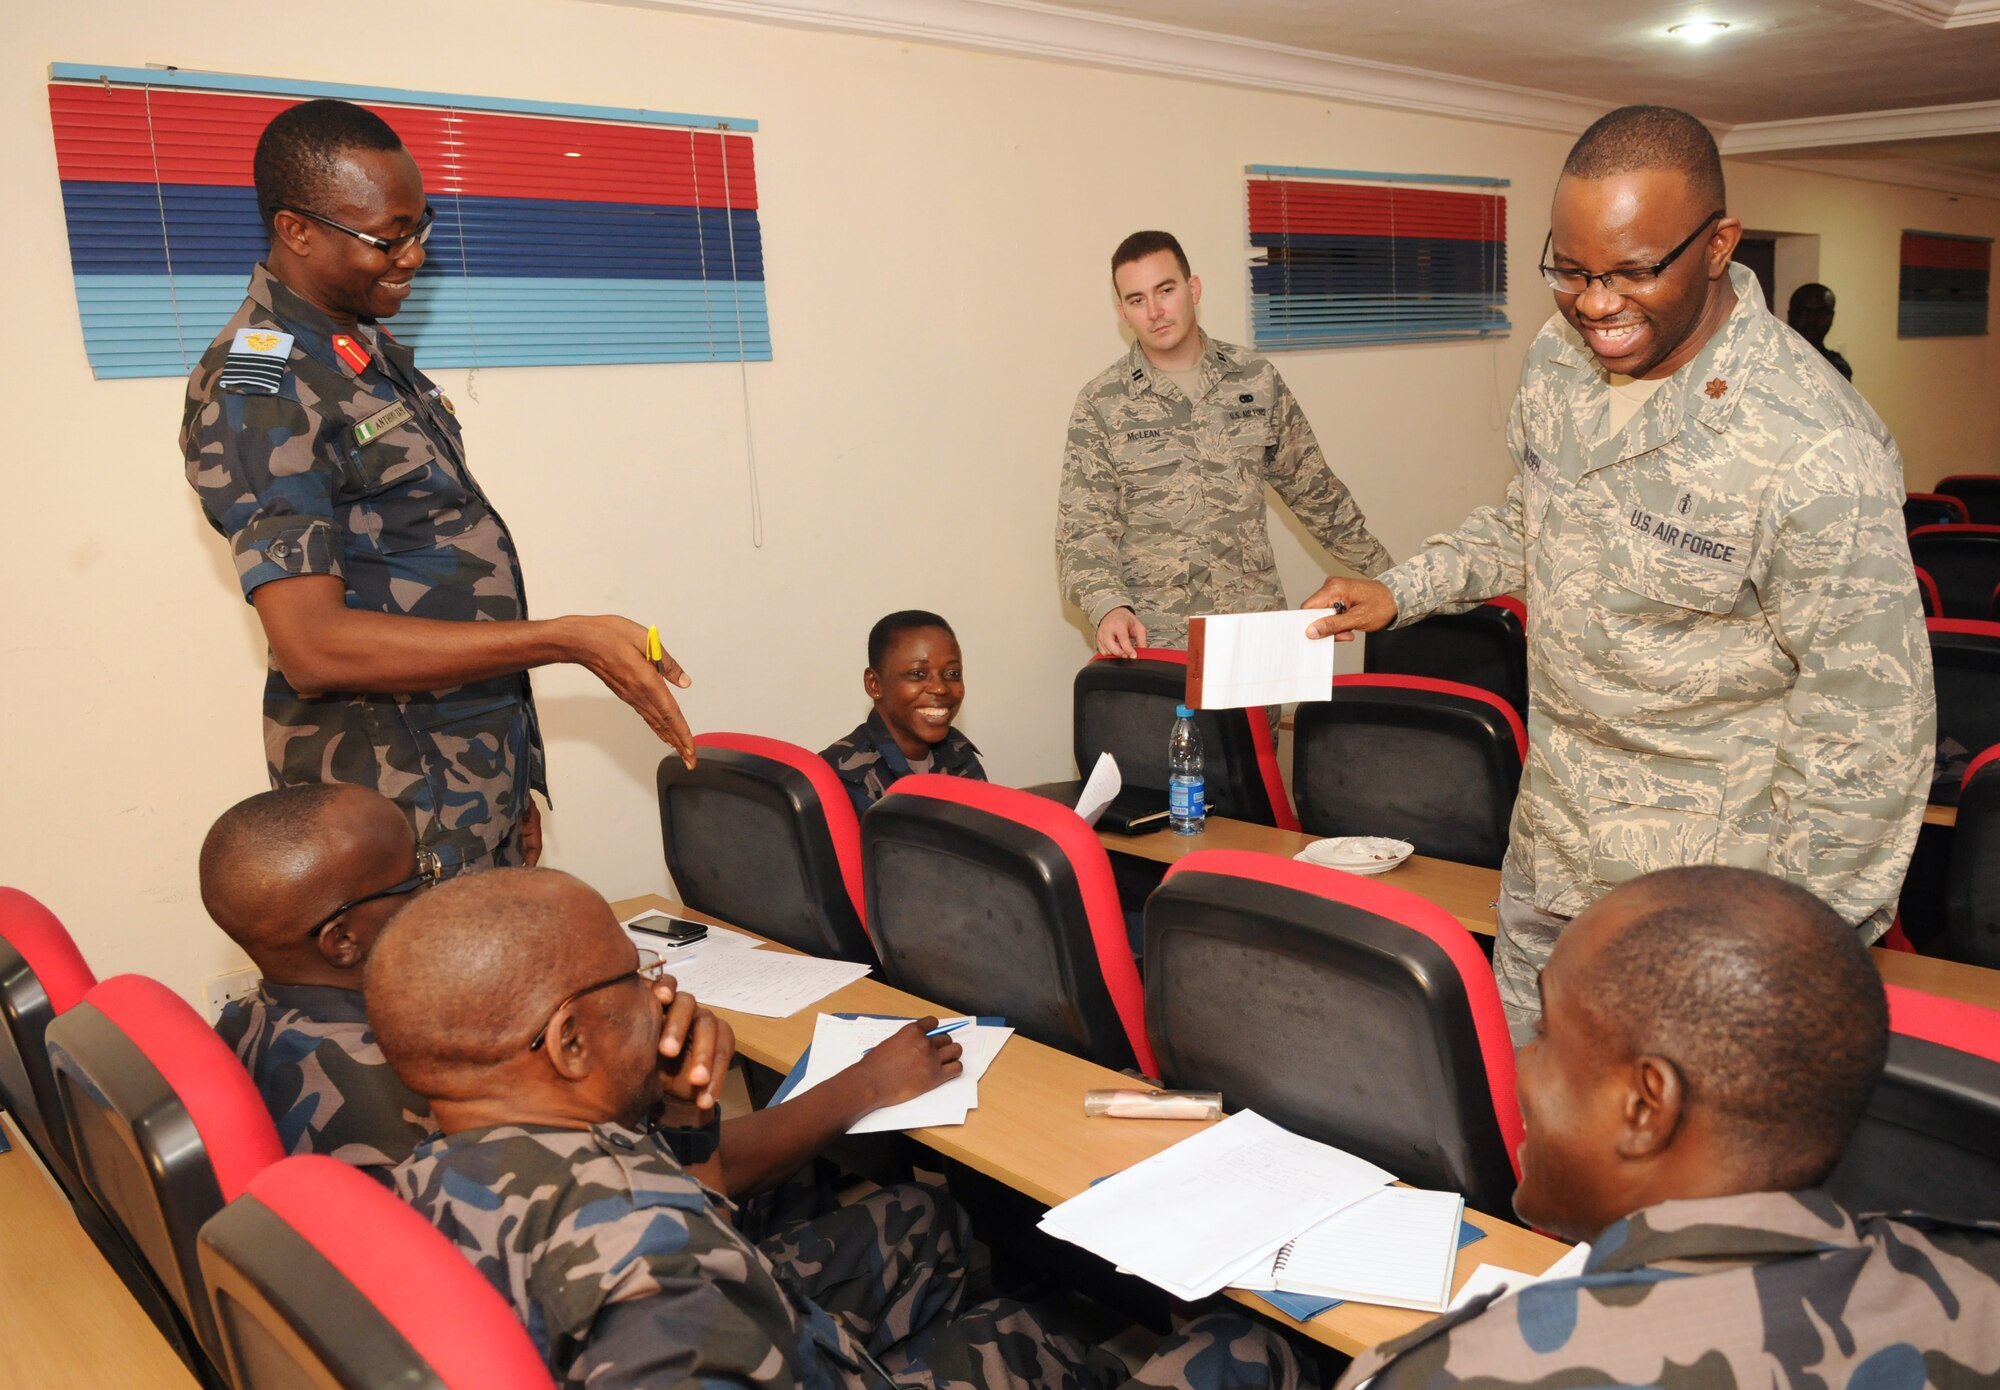 ABUJA, Nigeria – Members of the Nigerian air force laugh along with Maj. Francis Obuseh, a doctor of public health for the U.S. Air Forces in Europe-Air Forces Africa Surgeon General directorate, as he tells a story about one of his traveling experiences. The Nigerian air force partnered with USAFE-AFAFRICA, the 621st Contingency Response Wing, and U.S. Africa Command to host a disaster relief planning seminar at the National Defense College in Abuja, Nigeria, Jan 27-30. (Photo by U.S. Air Force Capt. Sybil Taunton/Released)